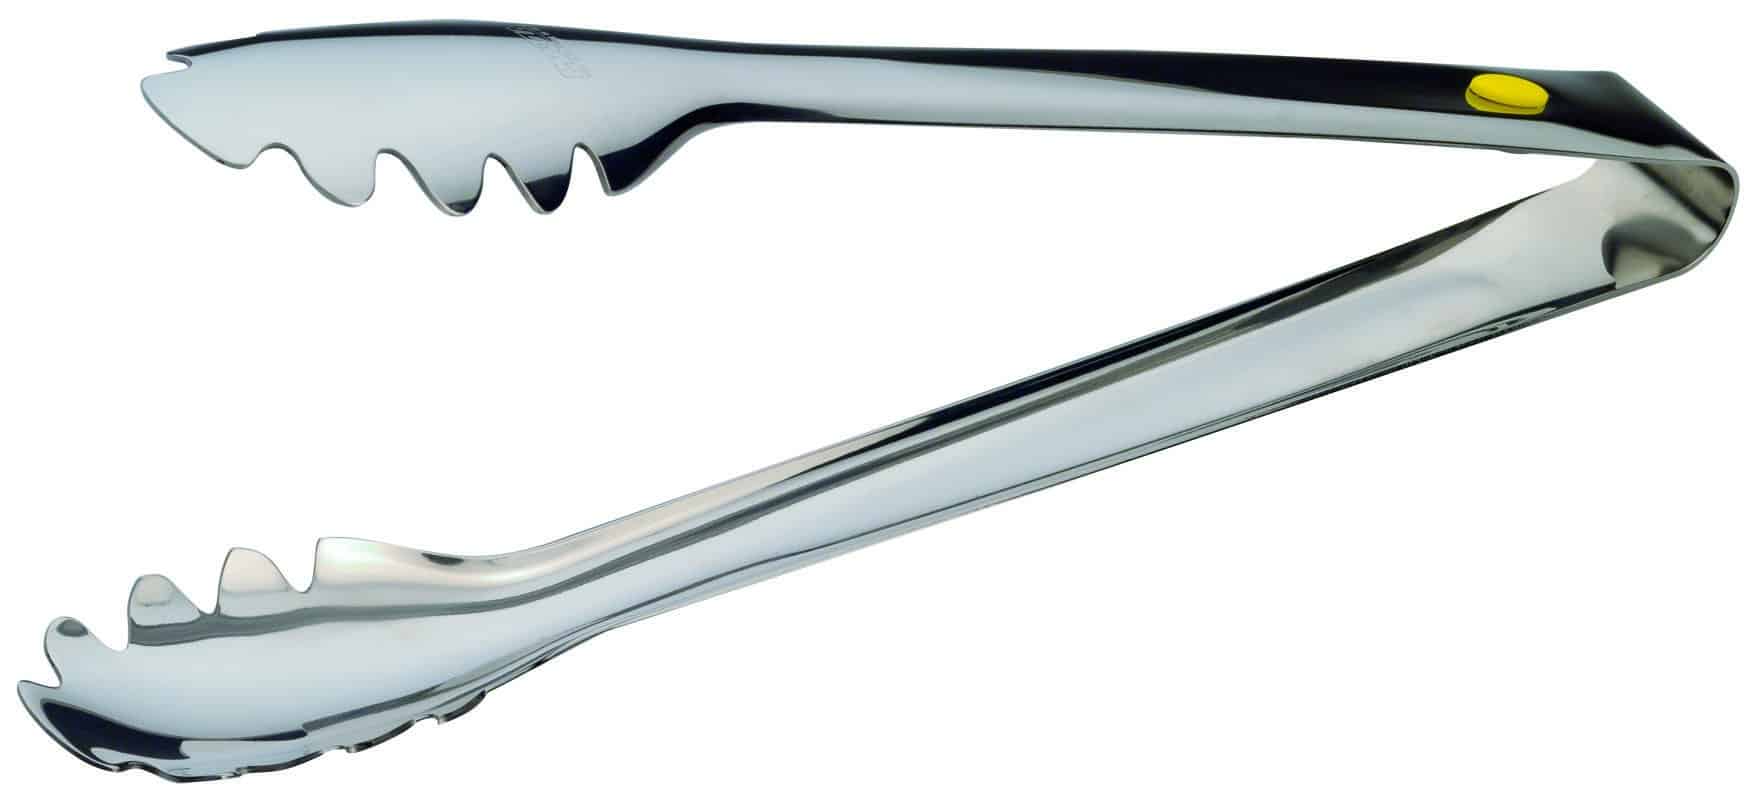 UNIVERSAL KITCHEN TONG 18cm S/S 18/10 PIAZZA ITALY